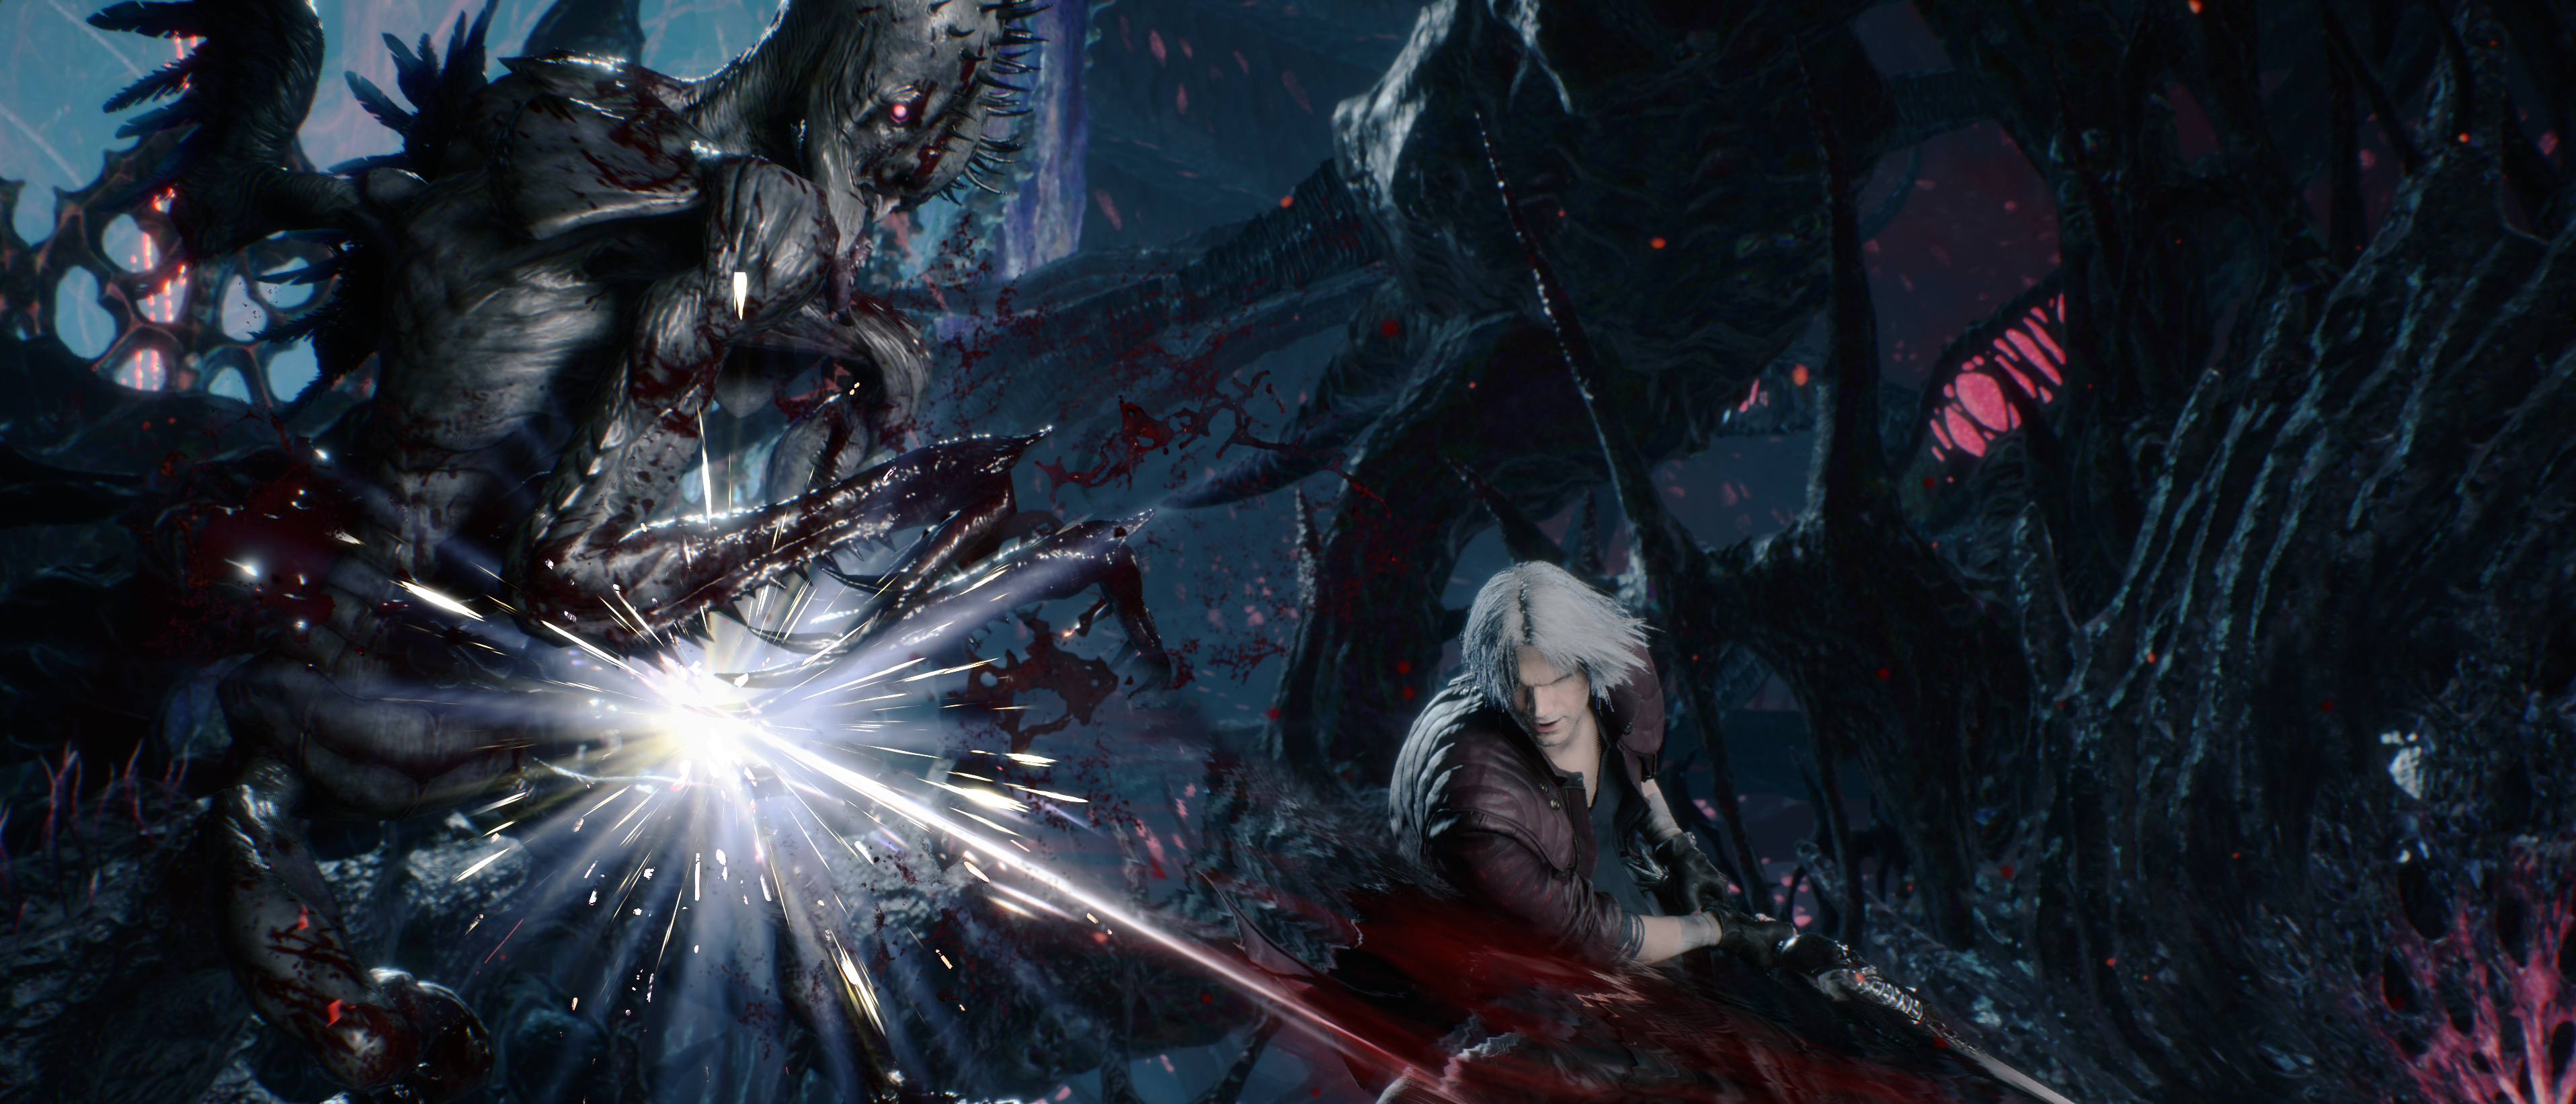 Devil May Cry 5 has a secret ending that no one knows about